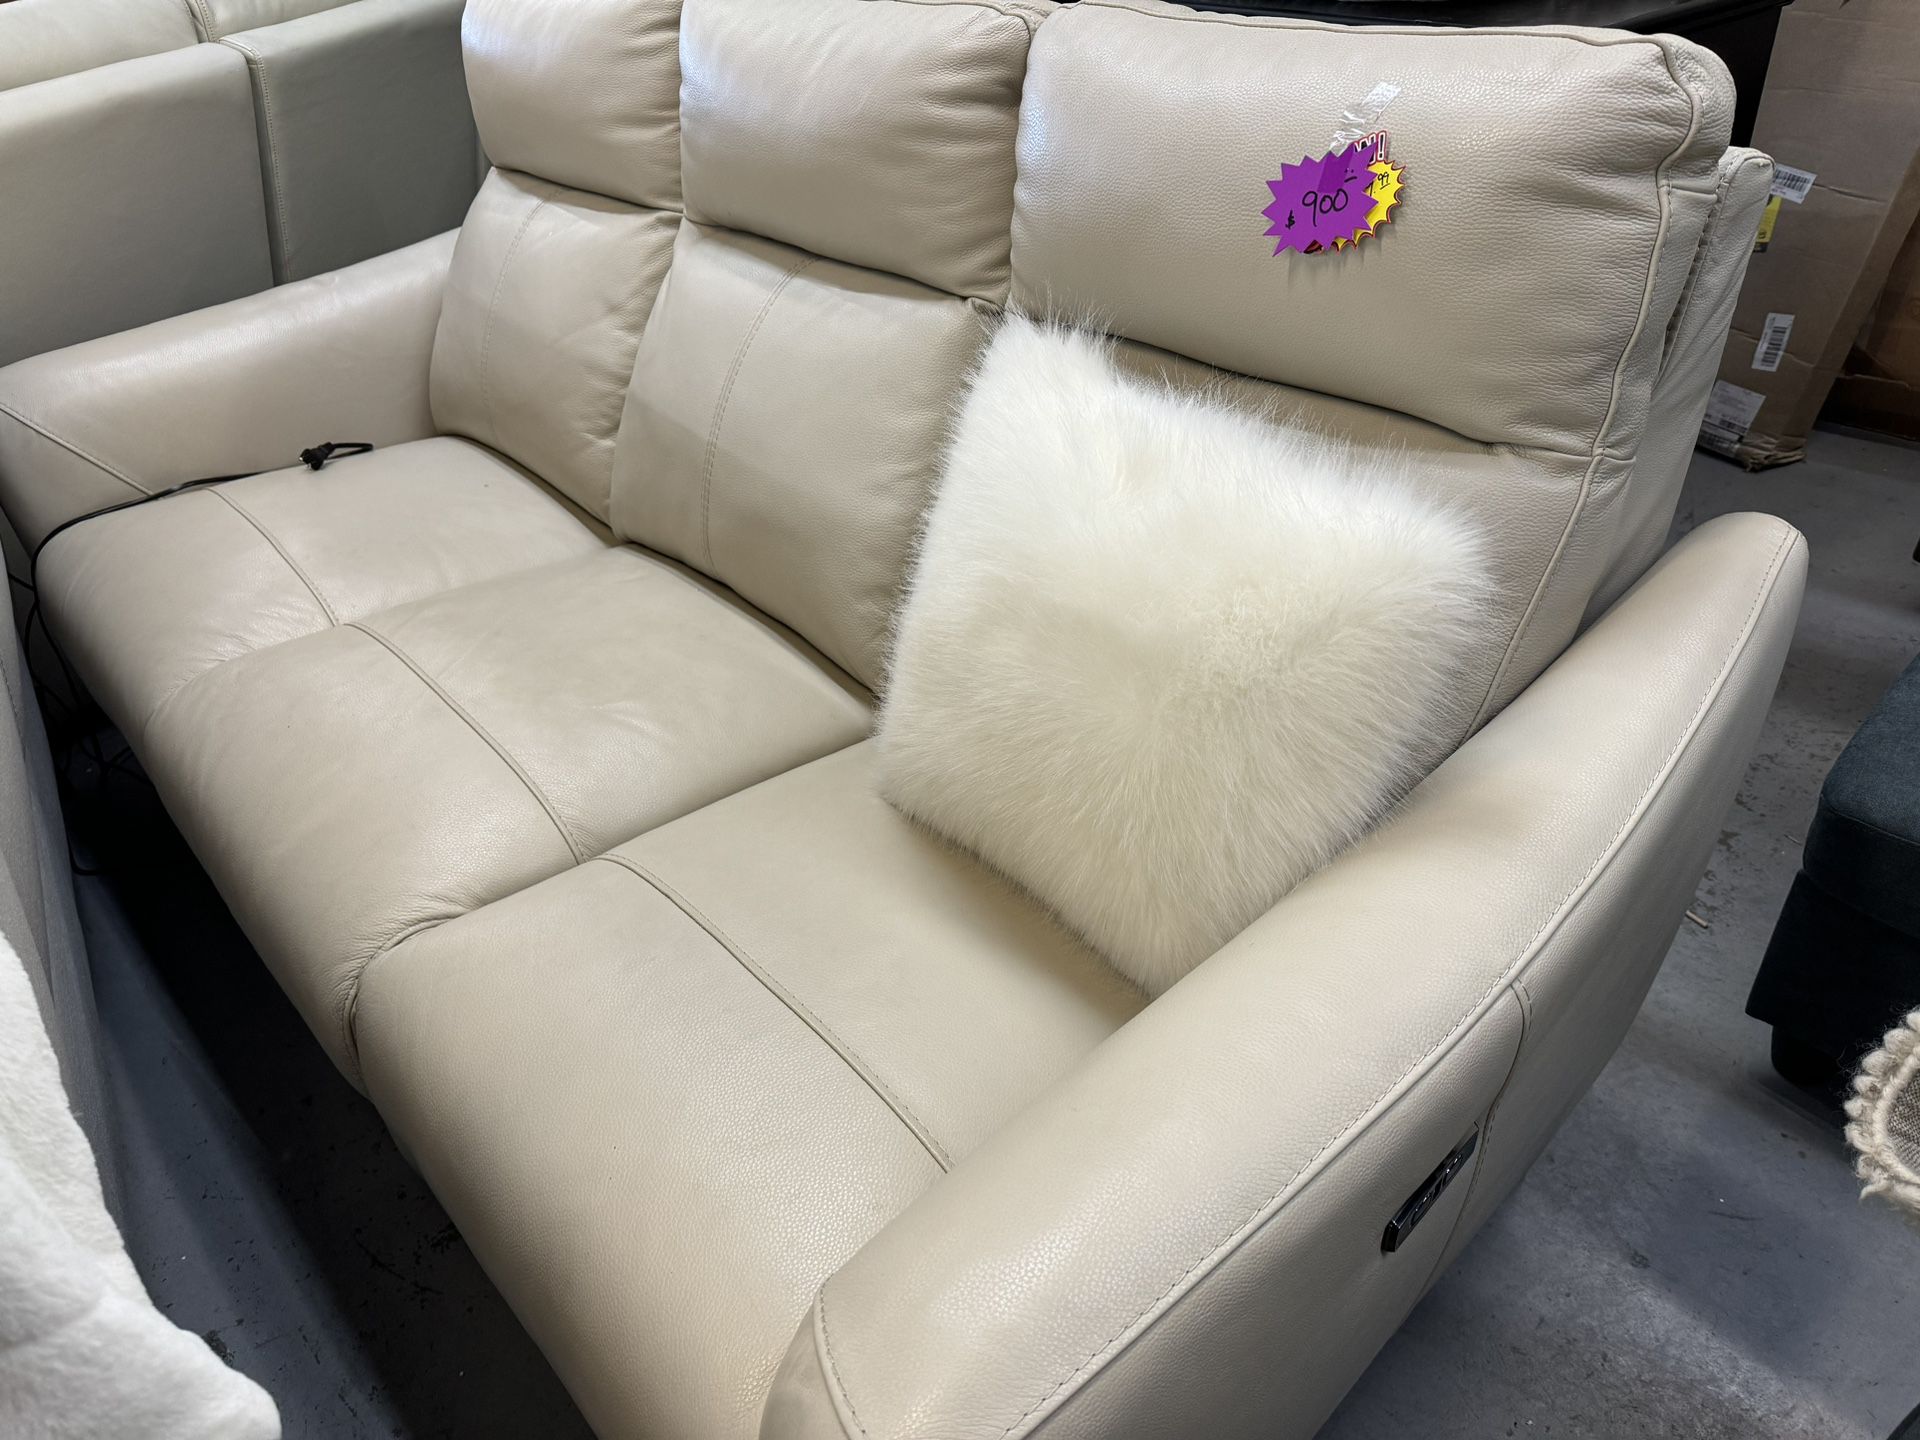 Power Recliner Sofa And Loveseat New Cream Color 